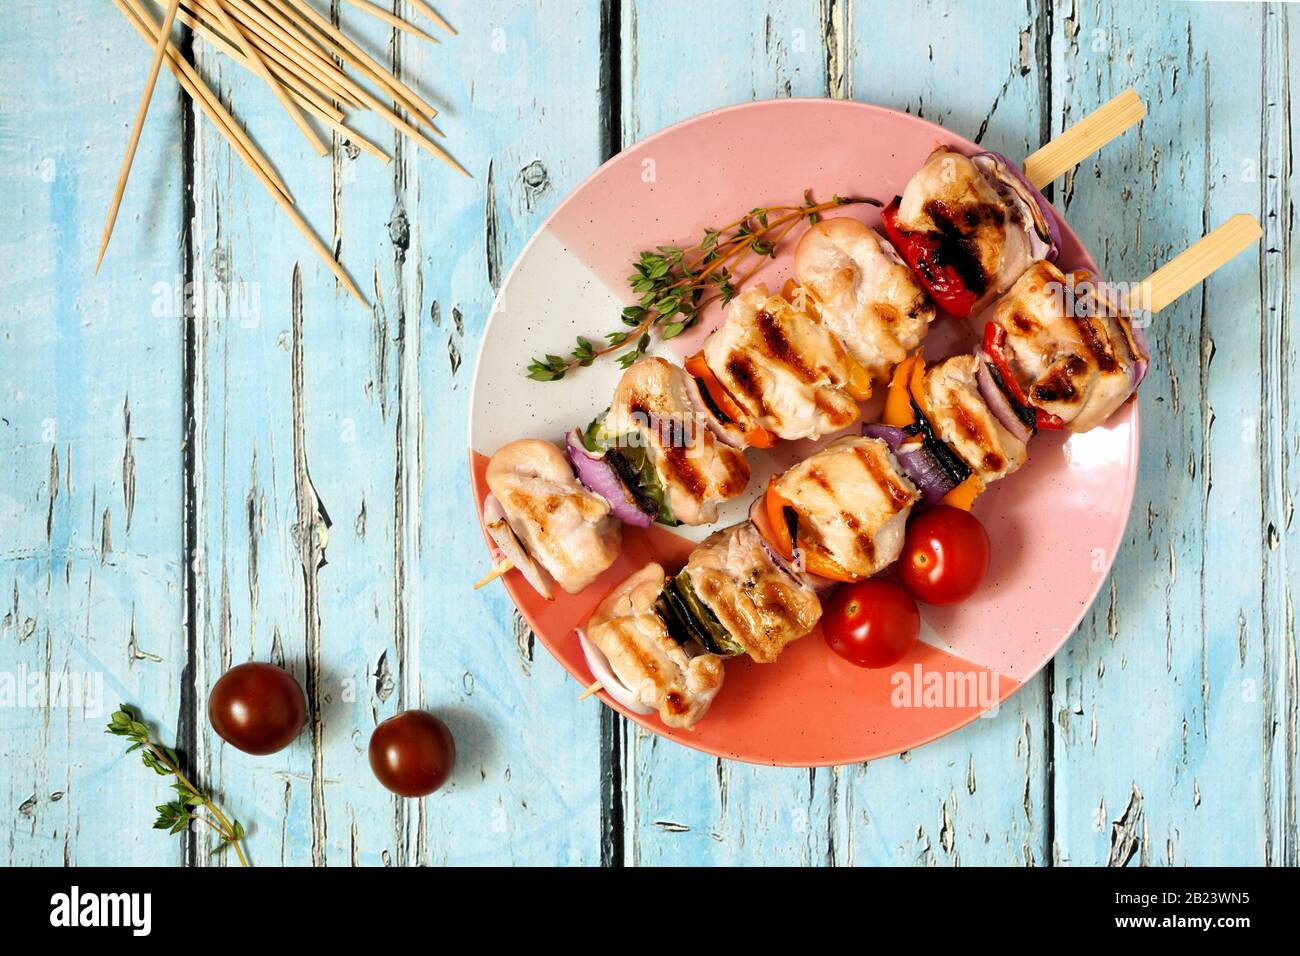 Grilled chicken and vegetable kabobs on plate. Top view over a blue wood background. Summer food concept. Stock Photo